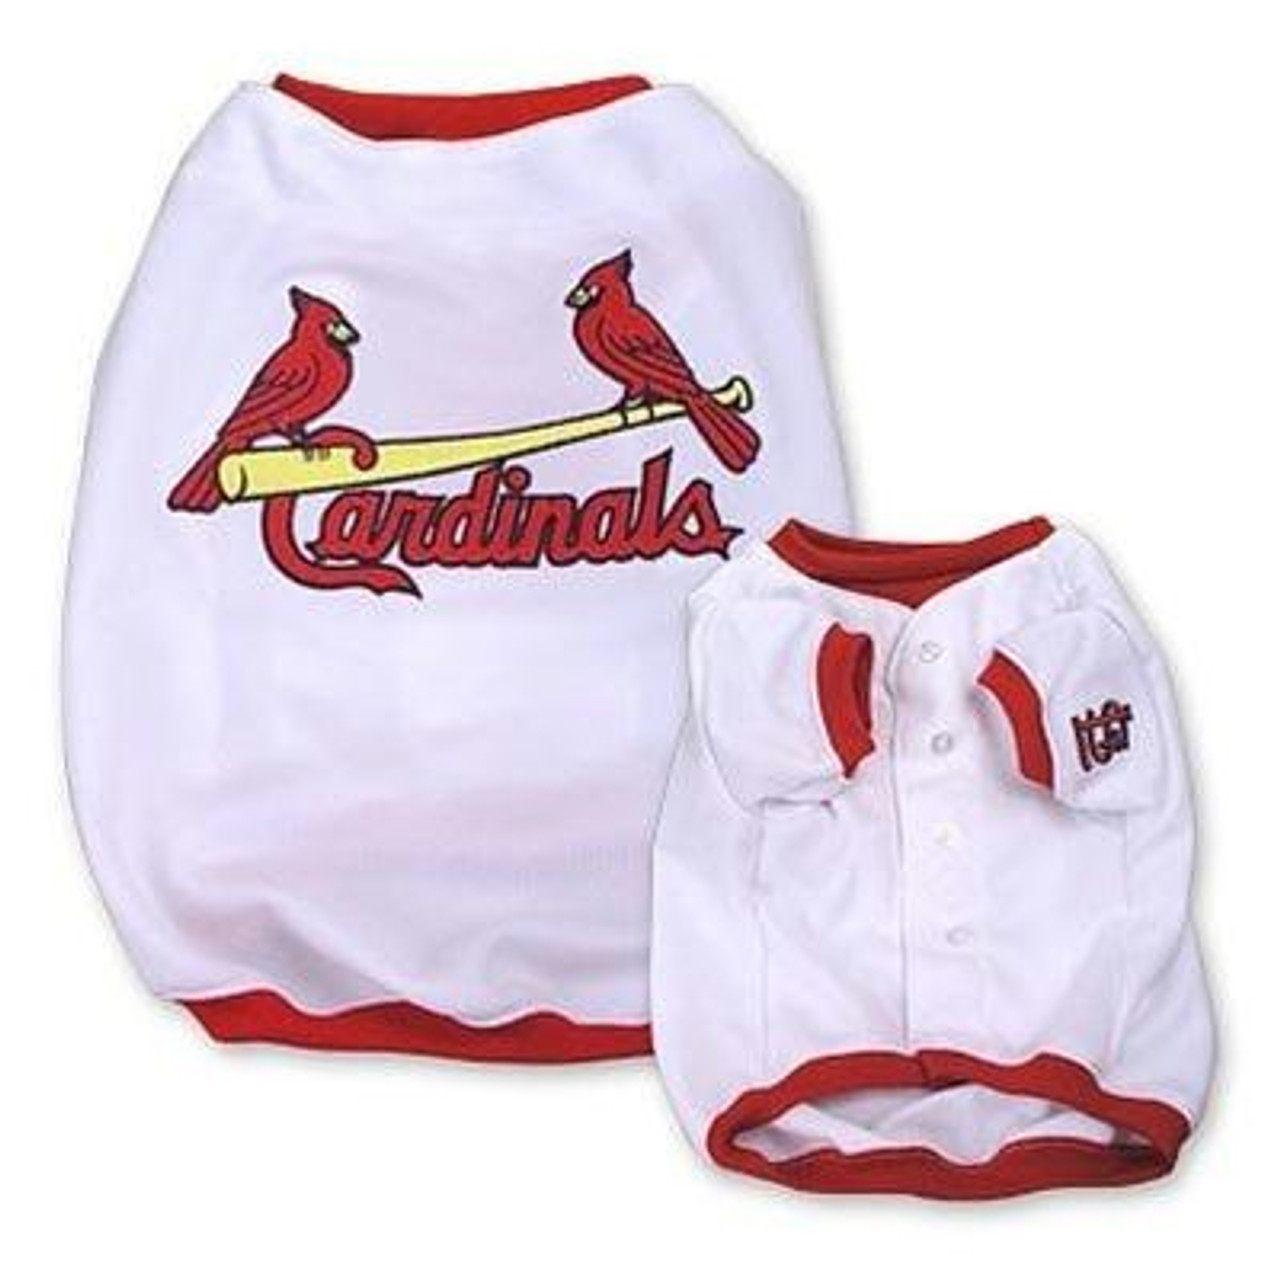 St. Louis Cardinals Officially Licensed Pet Jersey Size X-Small